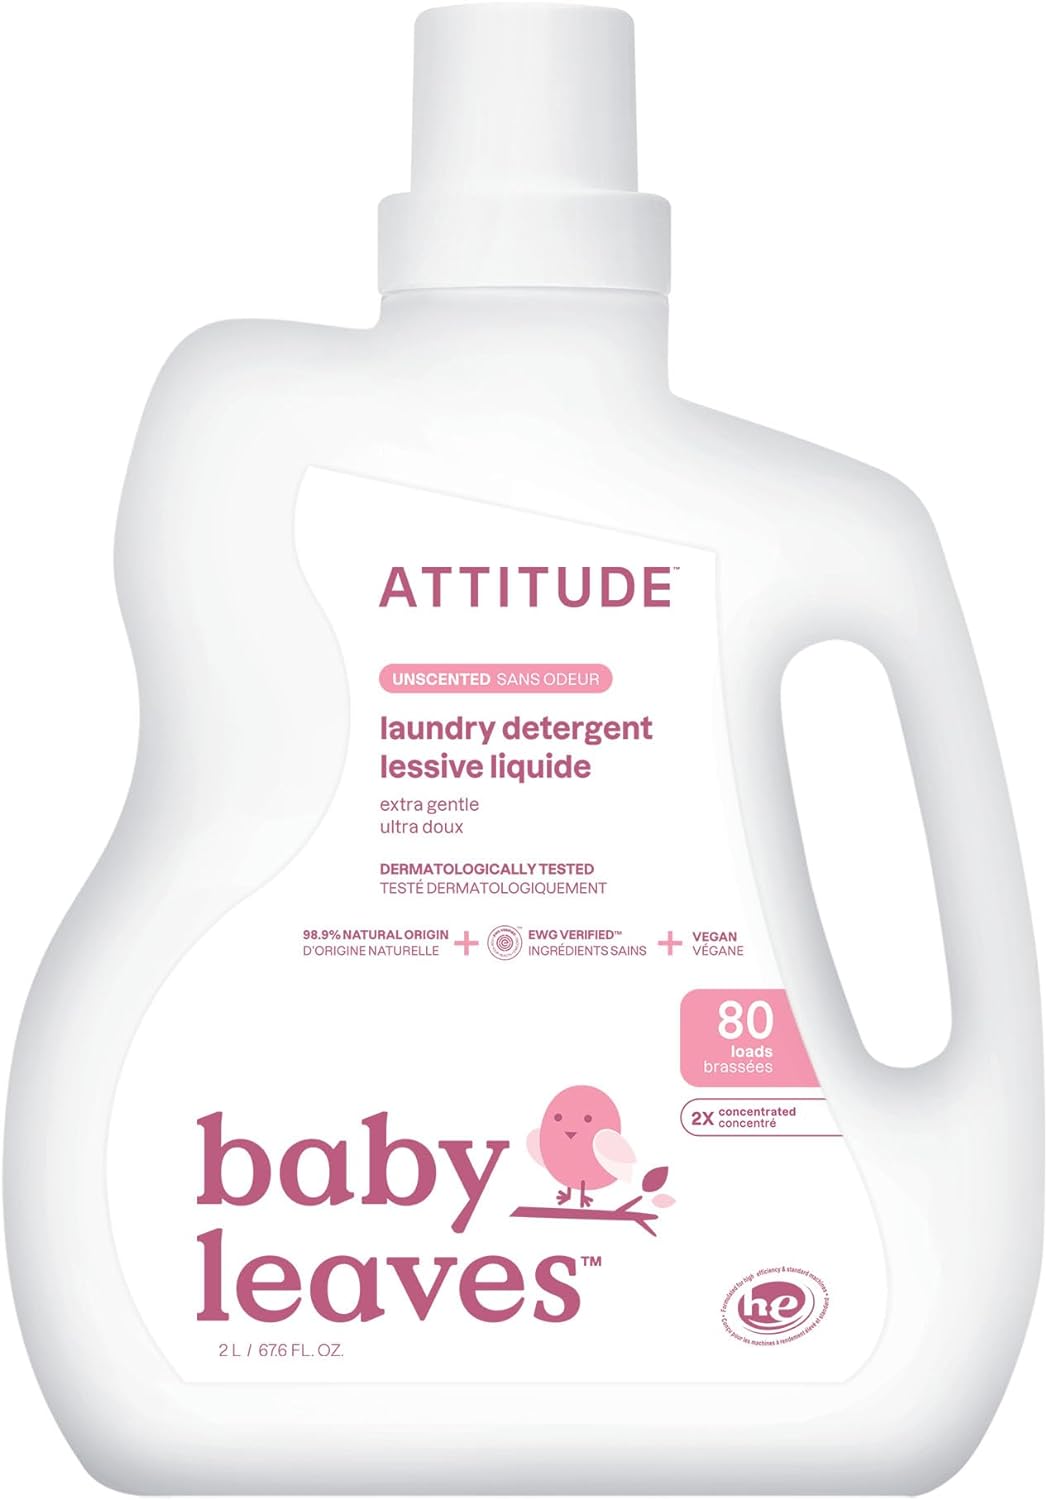 ATTITUDE Baby Laundry Detergent Liquid, EWG Verified, Safe for Baby Clothes, Infant and Newborn, Vegan and Naturally Derived Washing Soap, HE Compatible, Unscented, 80 Loads, 67.6 Fl Oz